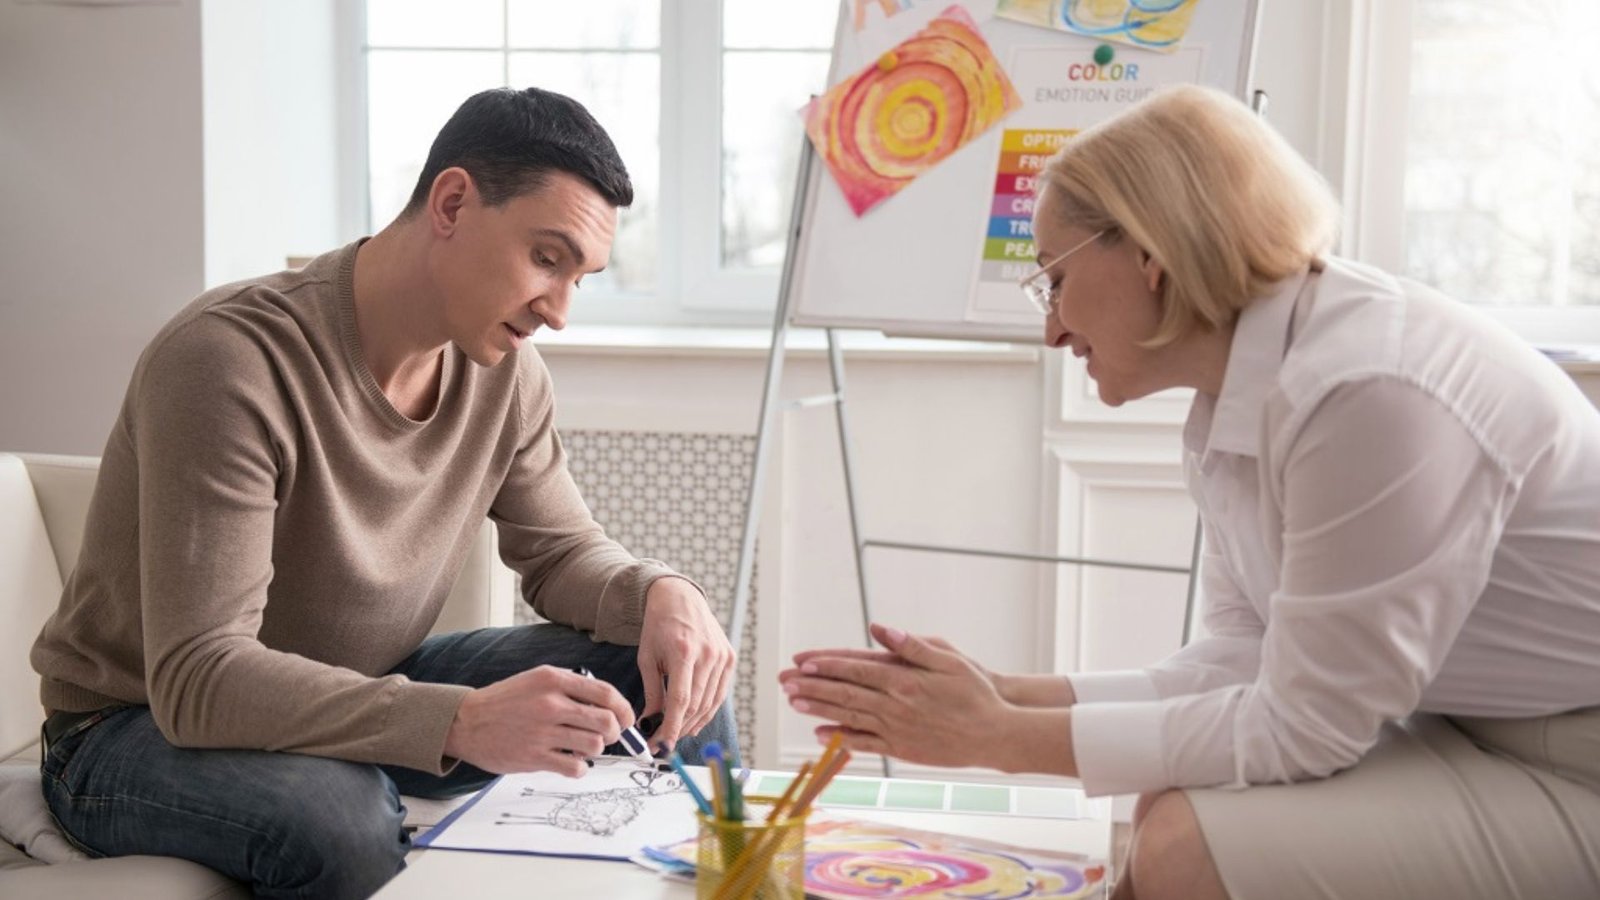 a man drawing while a woman is talking to the man, showing art therapy